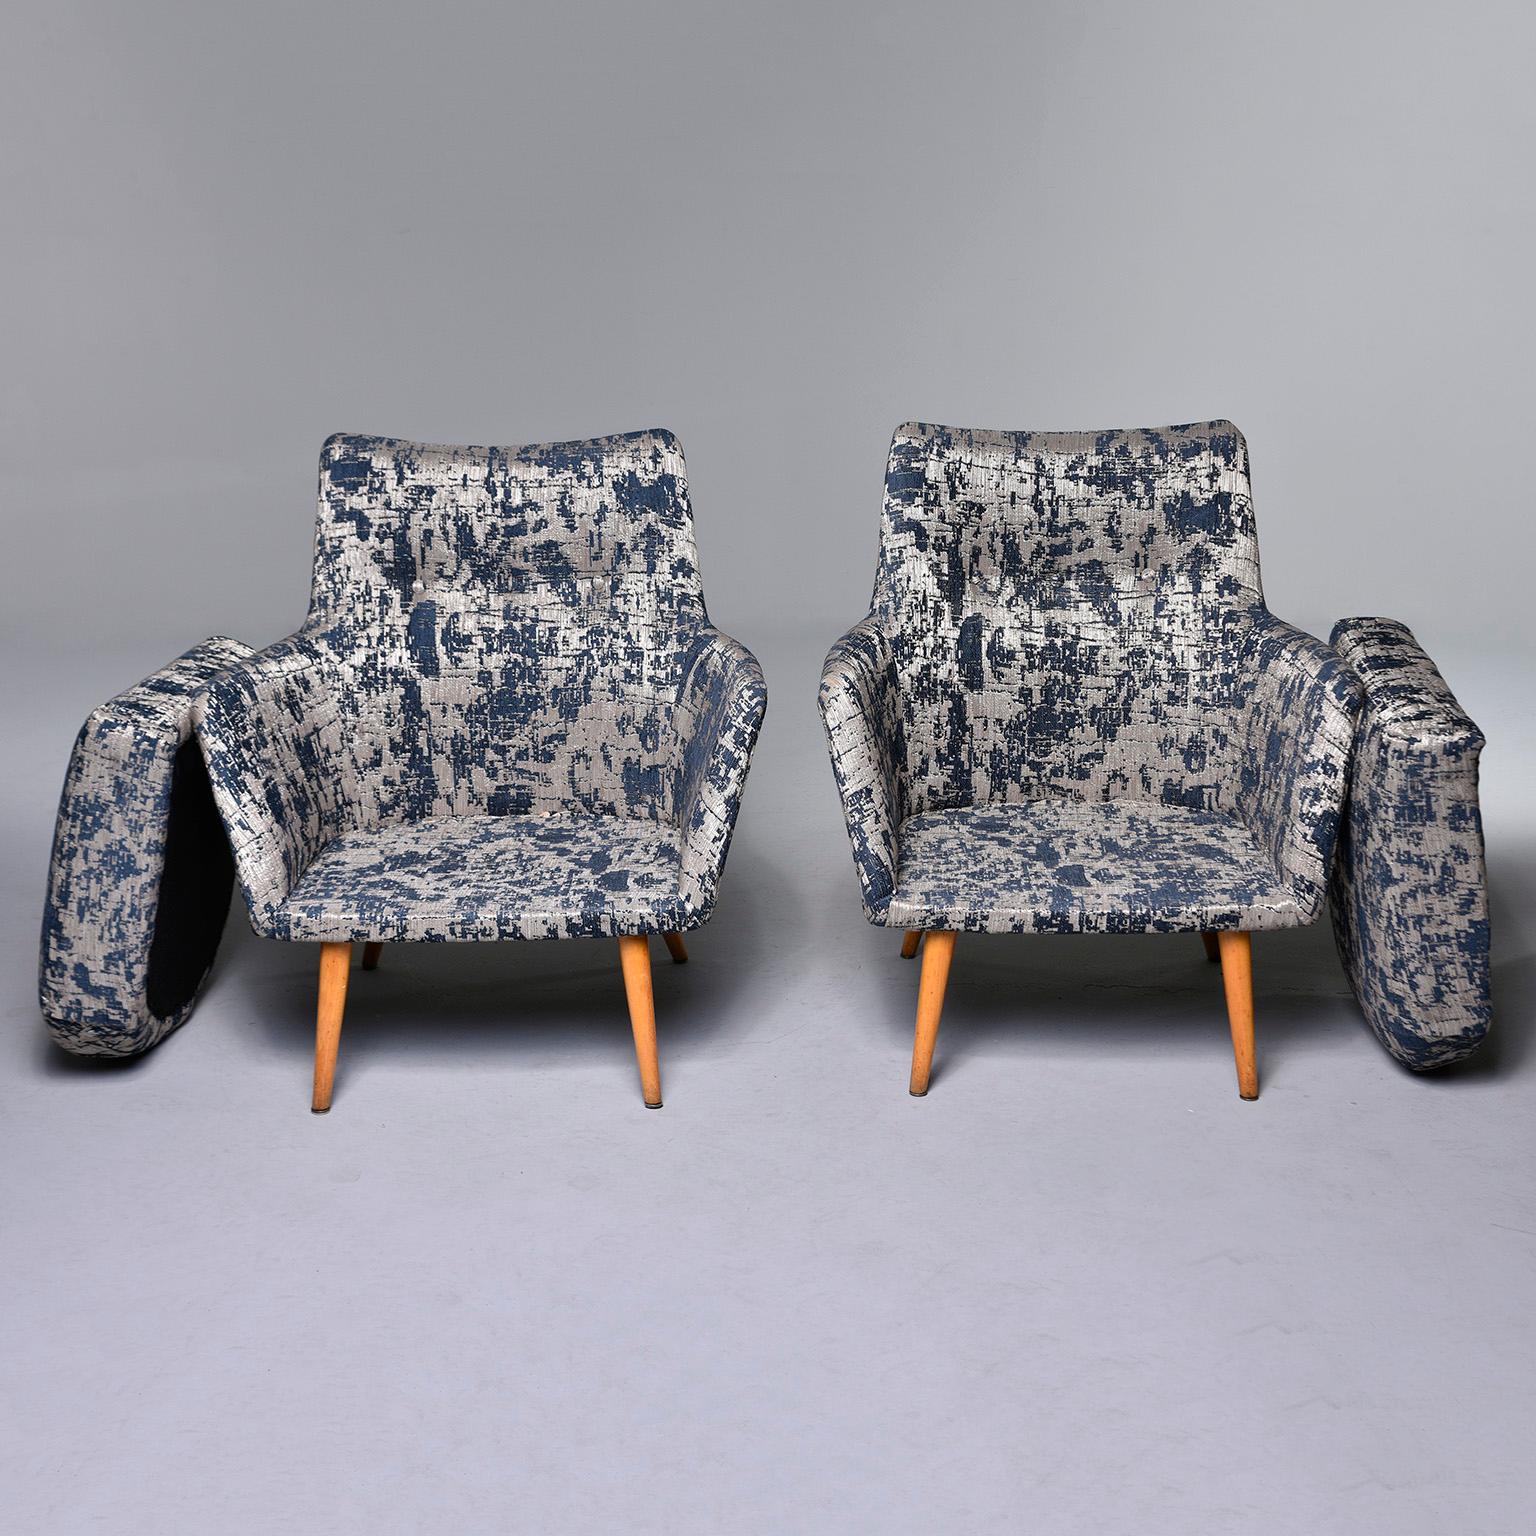 Pair of Italian Midcentury Armchairs with Blue and Silver Upholstery 2